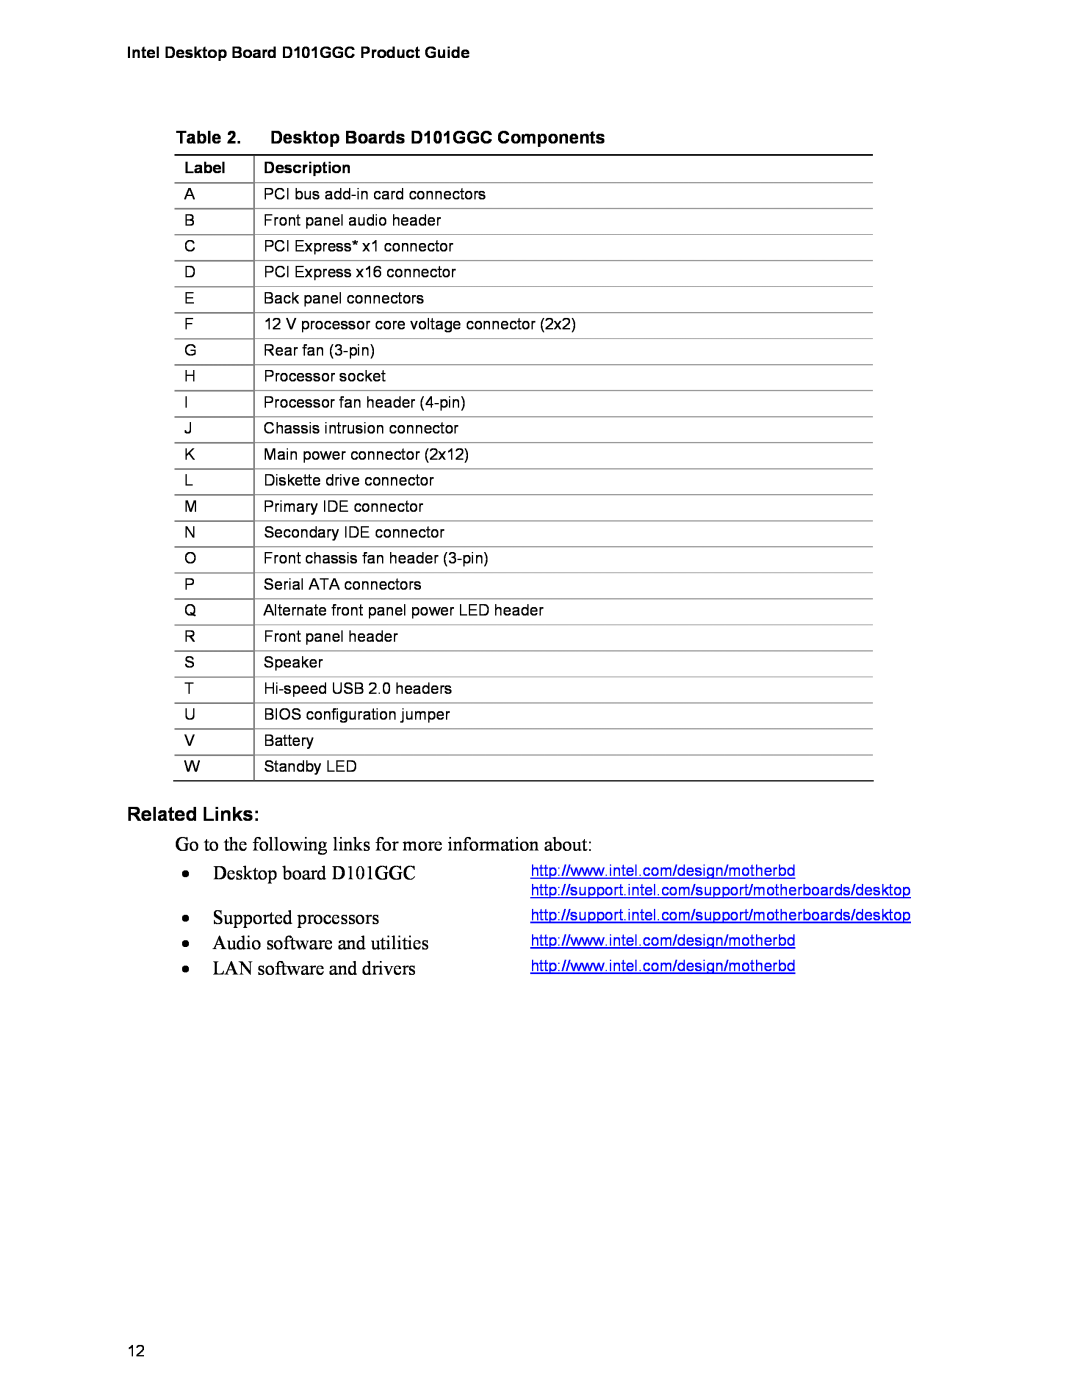 Intel manual Related Links, Table, Desktop Boards D101GGC Components 